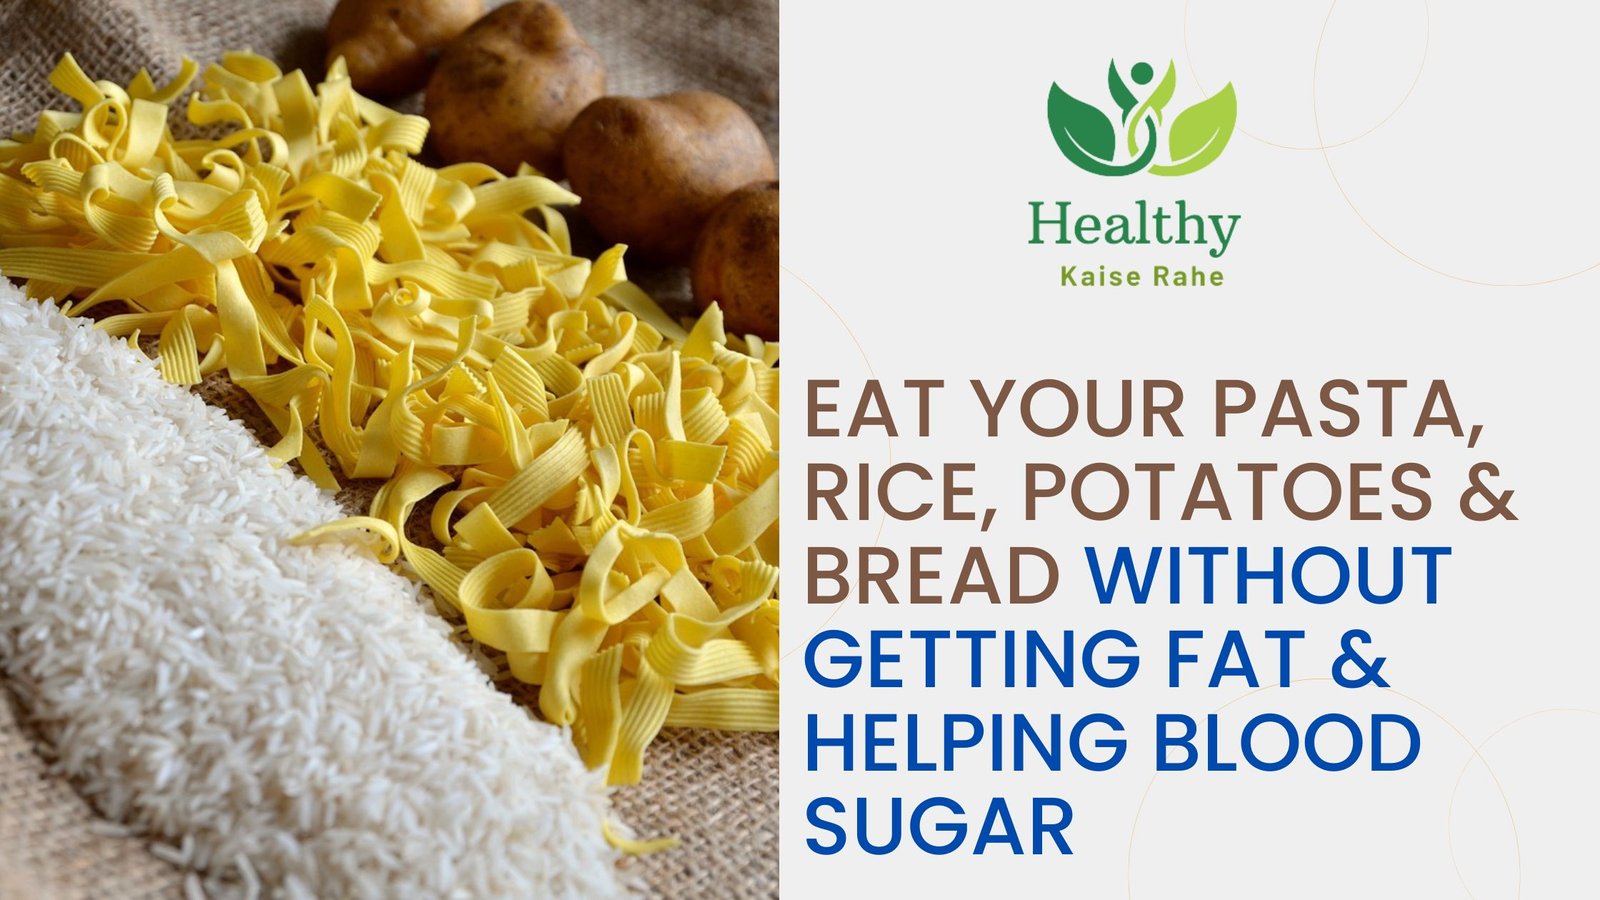 Eat Your Pasta, Rice, Potatoes & Bread Without Getting Fat & Helping Blood Sugar